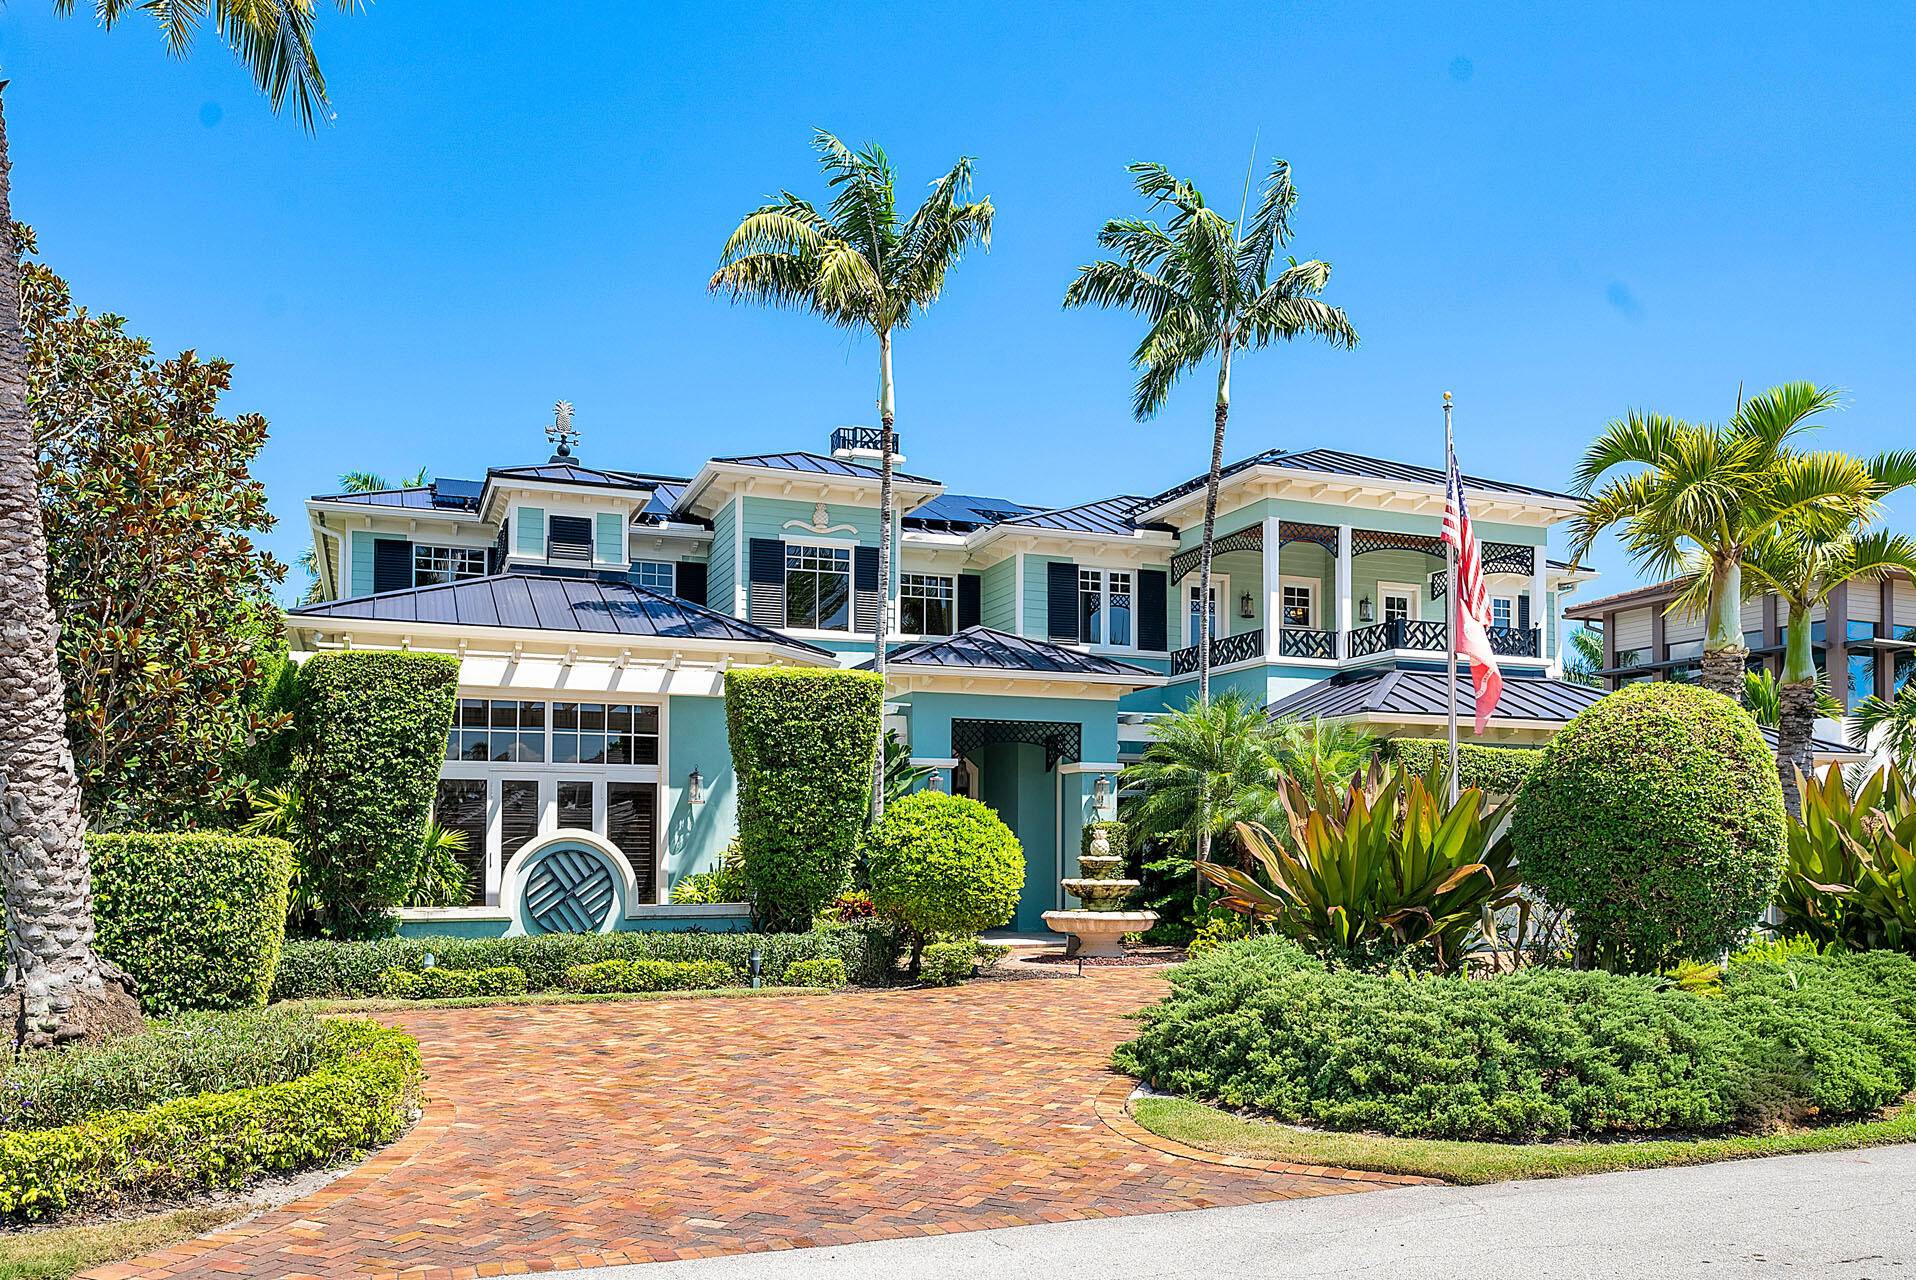 359 Thatch Palm Drive is a captivating West Indies style estate situated on an oversized interior lot in South Florida's most desirable community, Royal Palm Yacht Country Club.